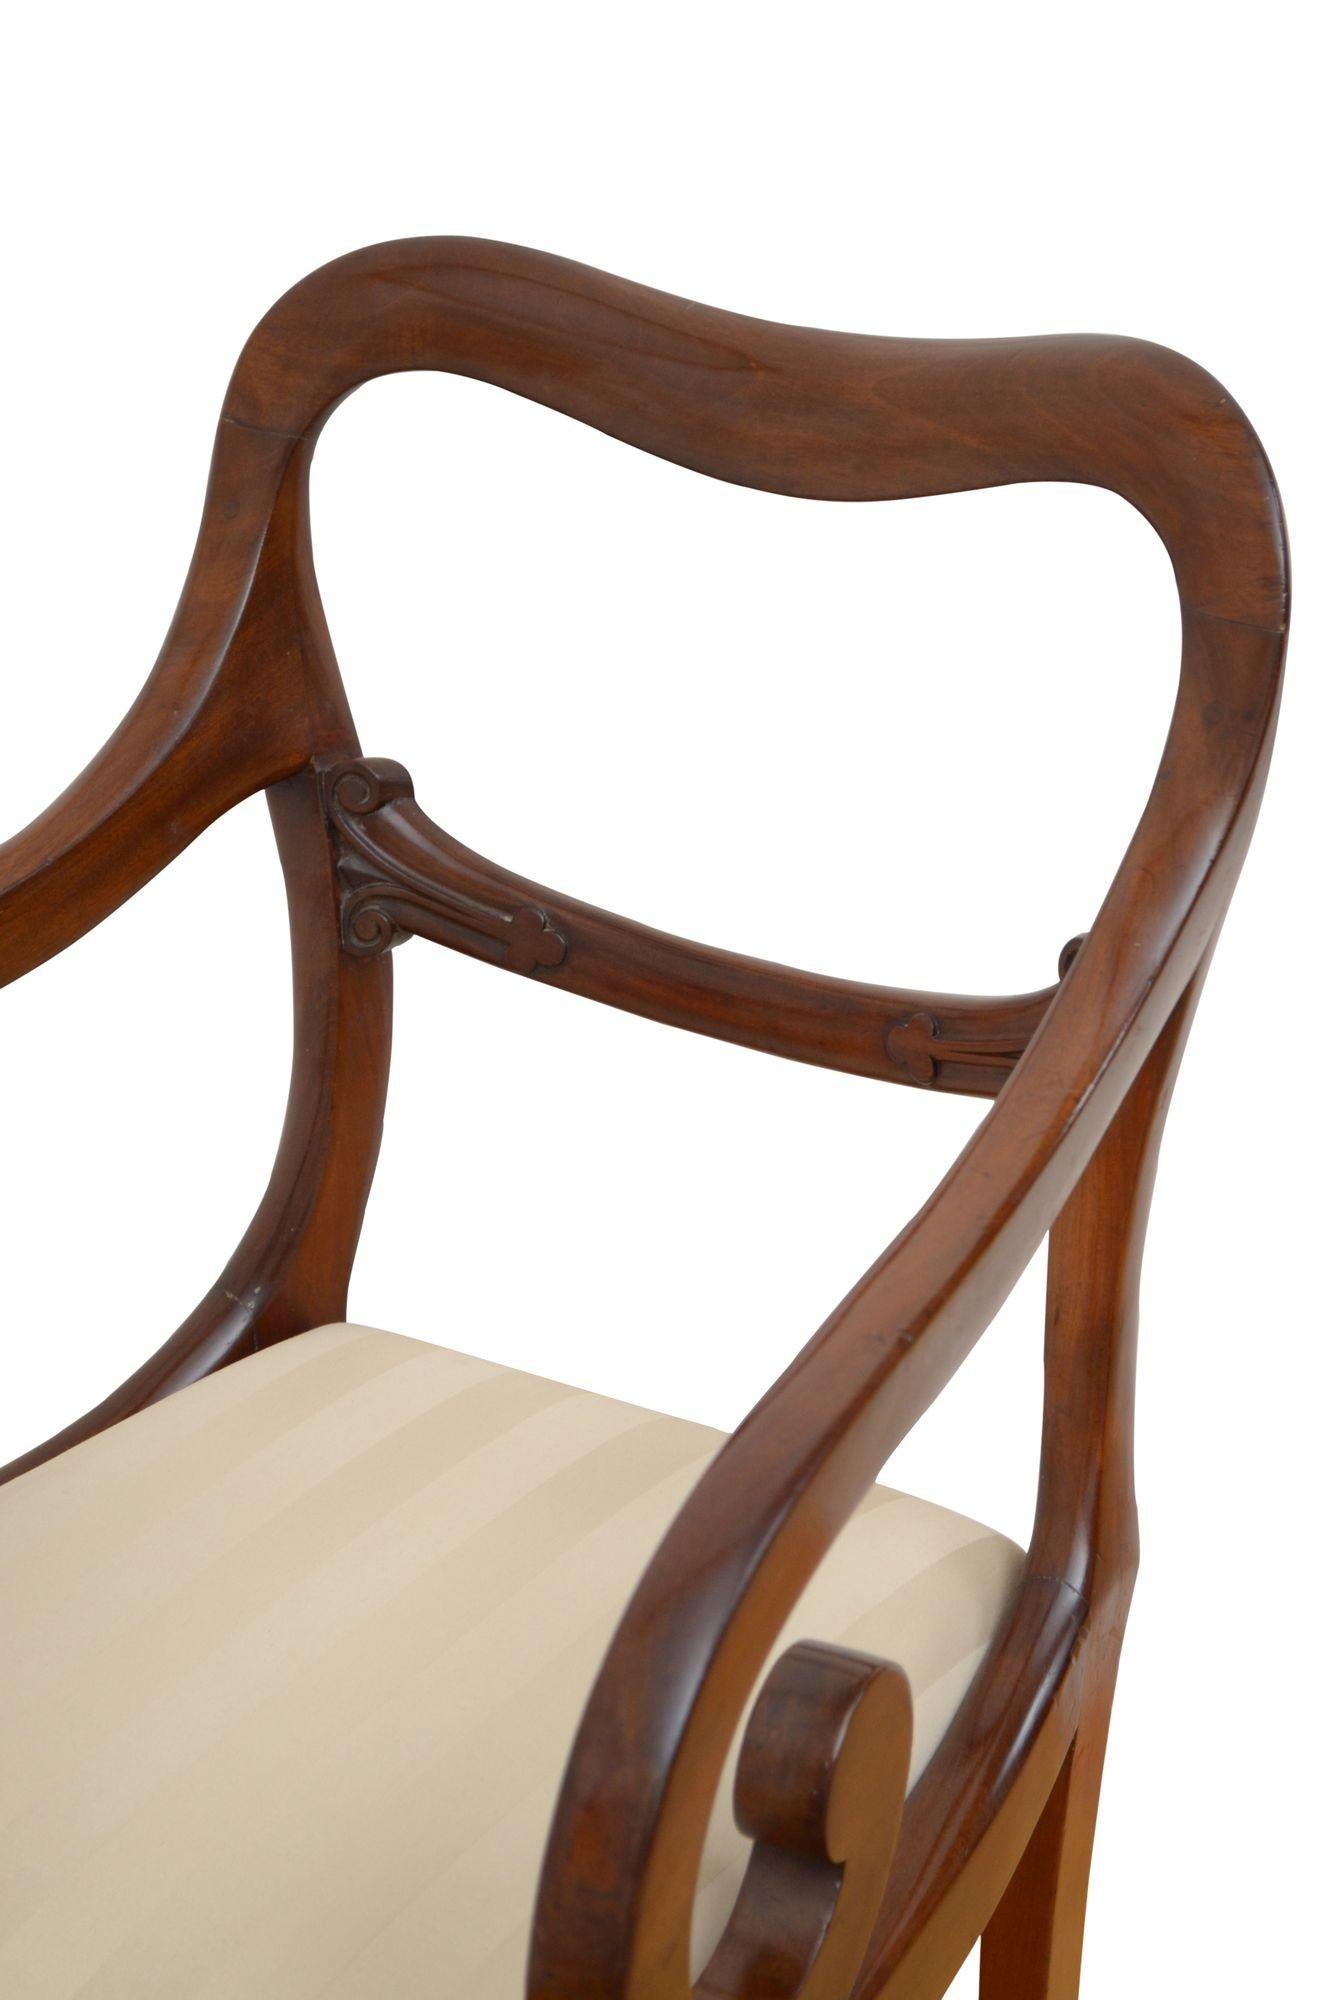 P0244 fine quality, solid mahogany William IV occasional chair, having shaped top rail above carved mid rails and drop in seat upholstered in cream fabric flanked by open scroll arms, all standing on turned, tapered shaped legs. This antique chair